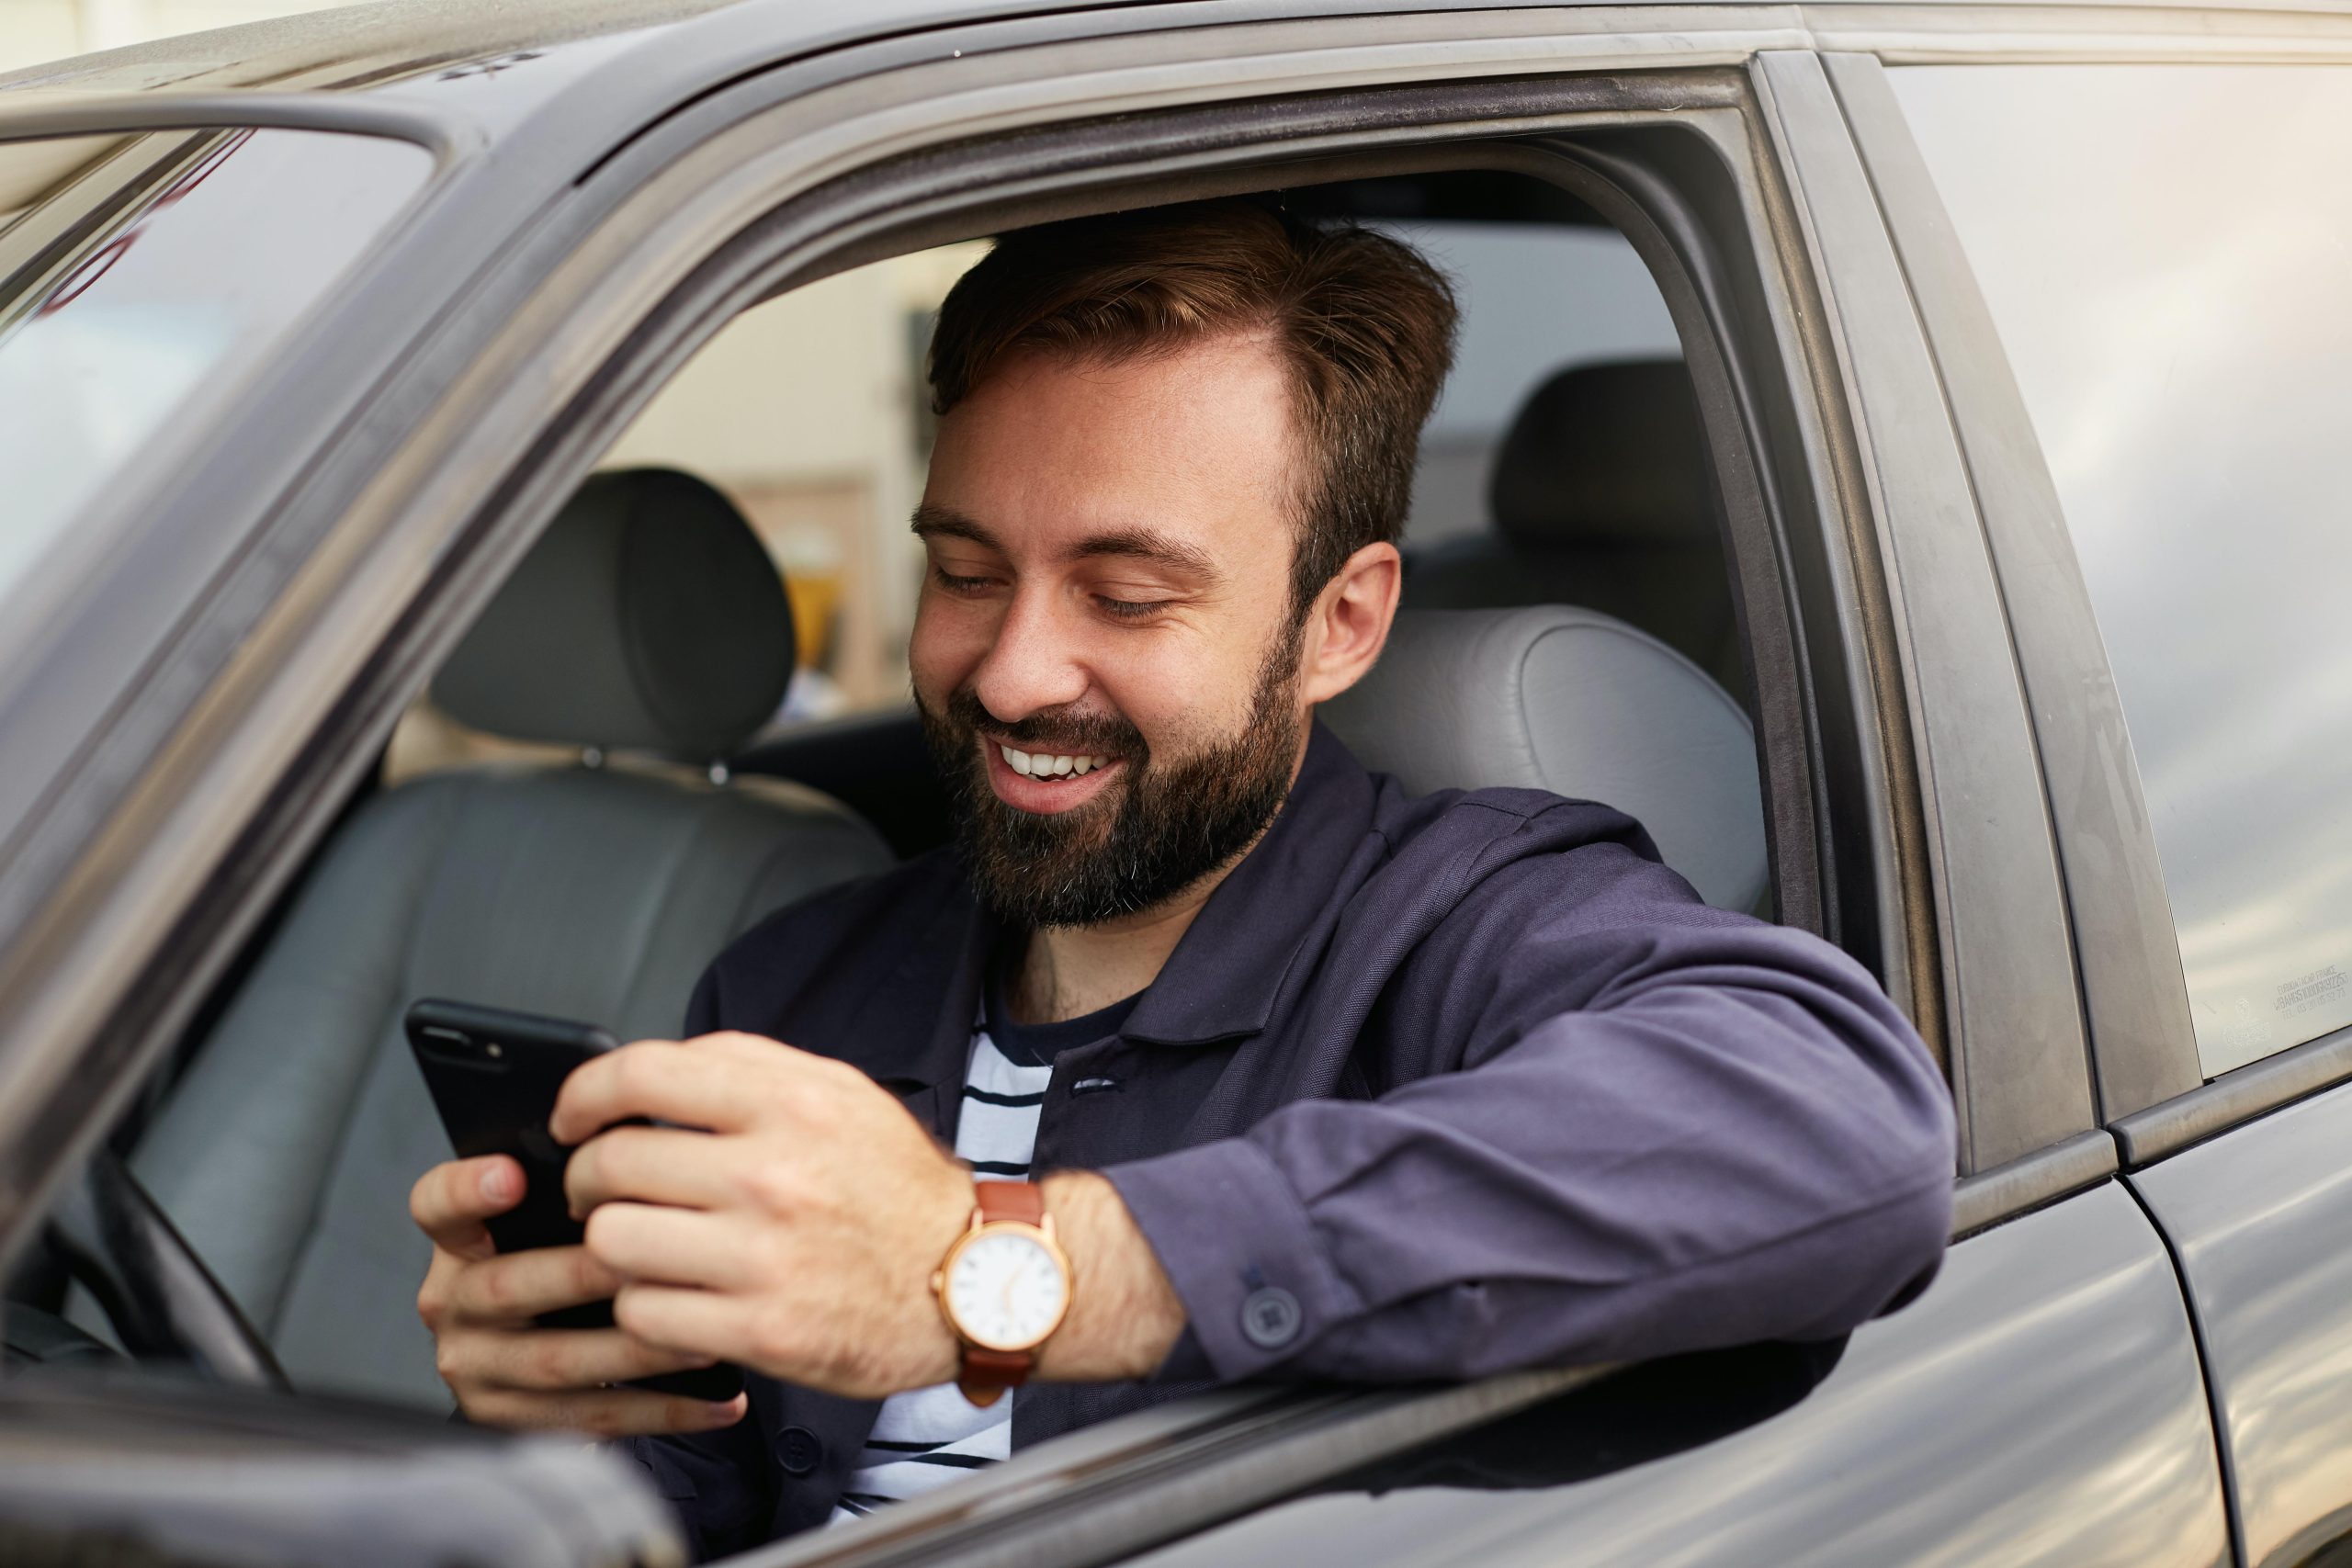 A focused entrepreneur seamlessly tracking his mileage using the MileageWise automatic tracker app on his smartphone, reflecting the ease and efficiency of this robust mileage tracking solution.